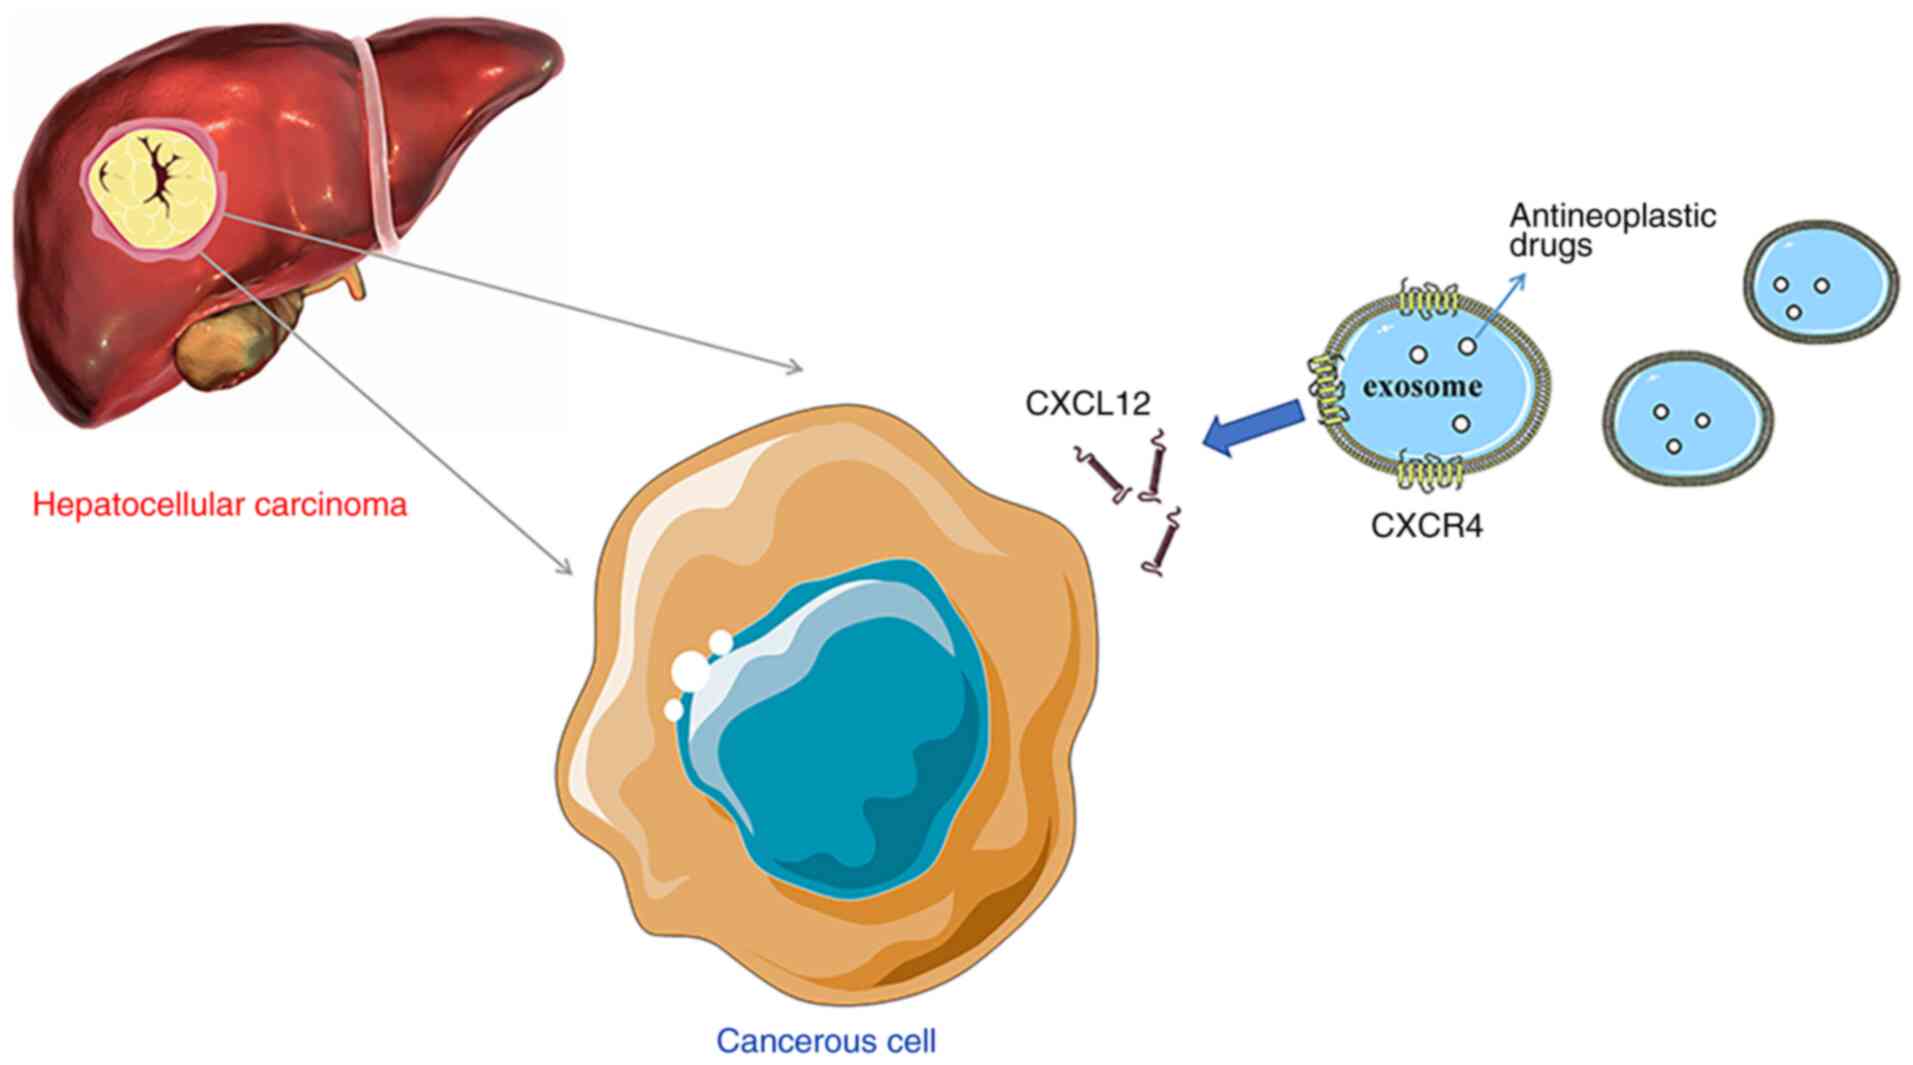 Role of chemokines in hepatocellular carcinoma (Review)